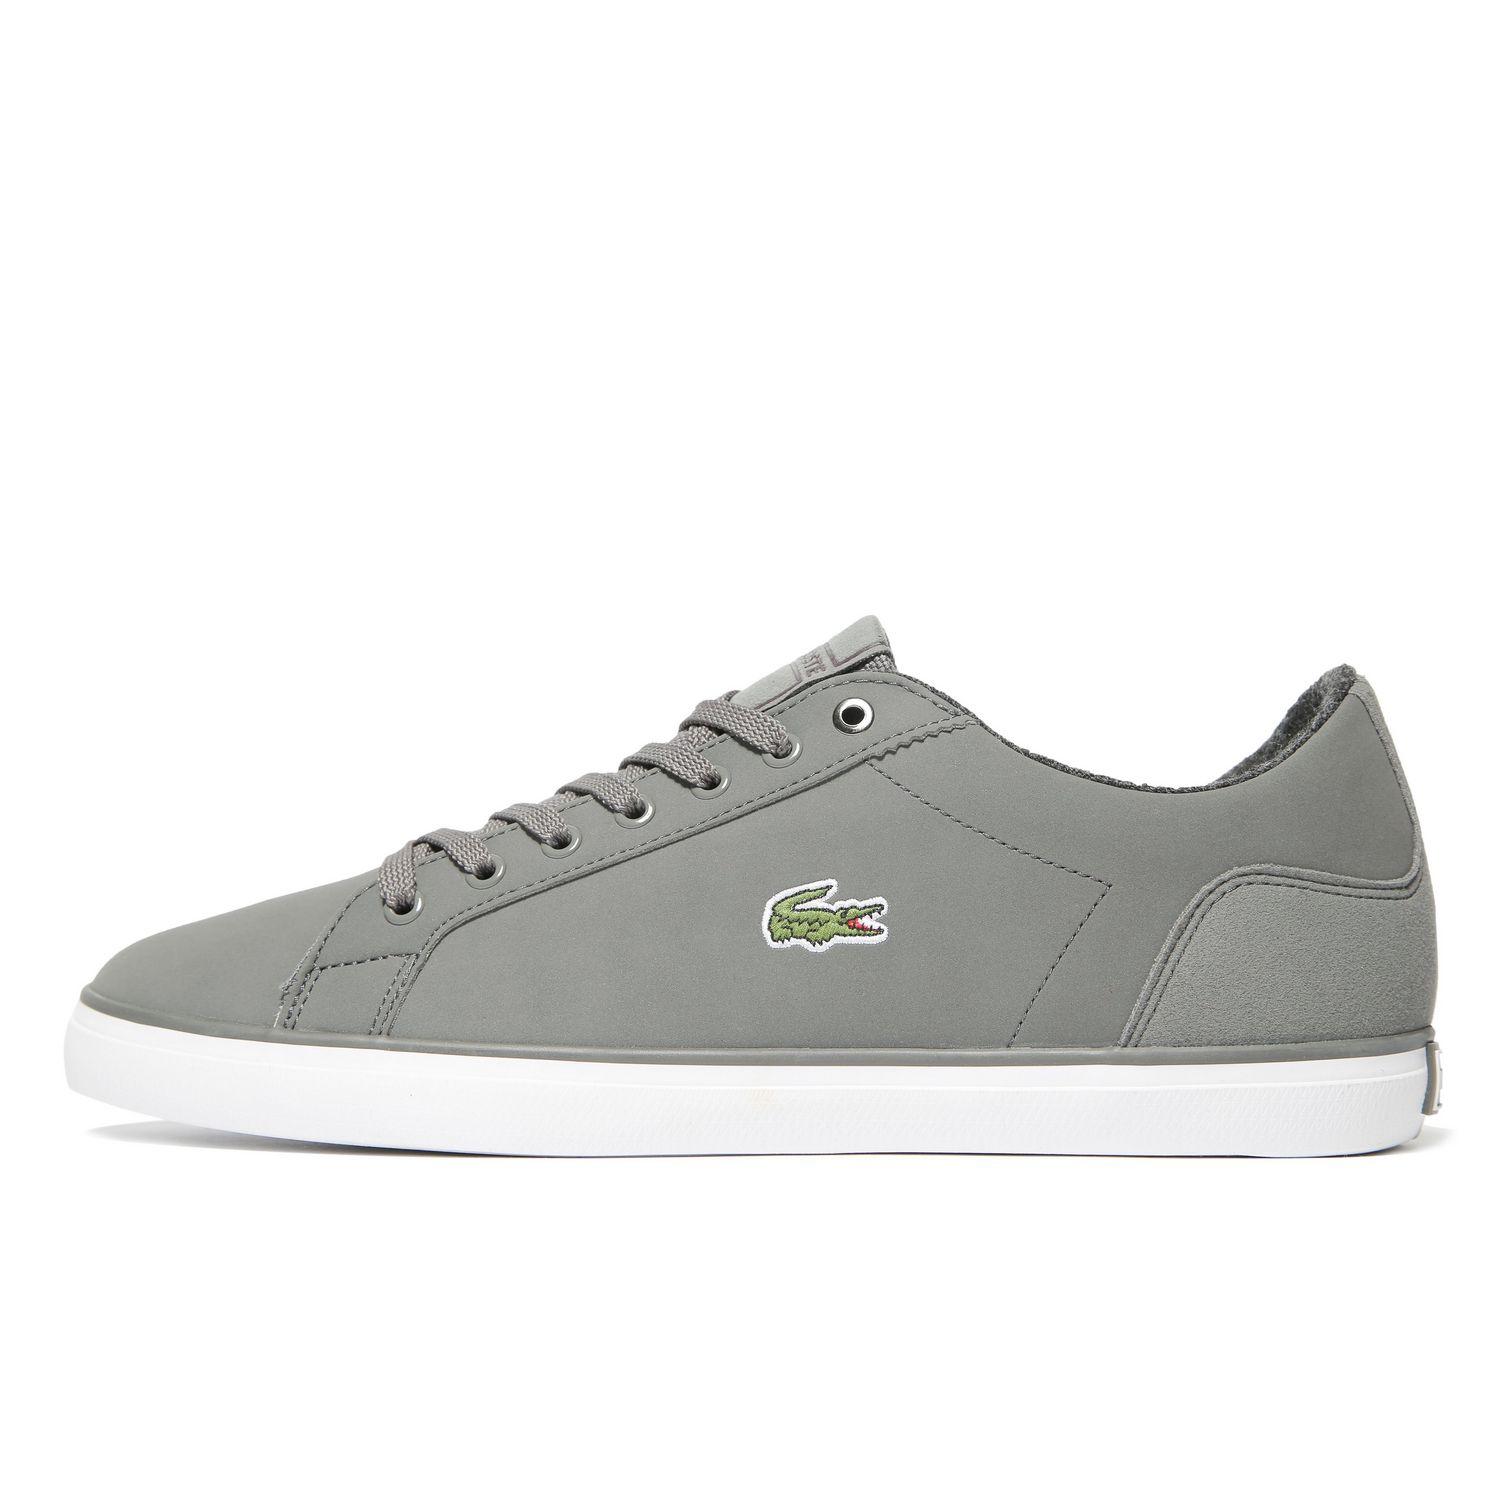 Lacoste Leather Lerond Nubuck in Grey (Grey) for Men - Lyst